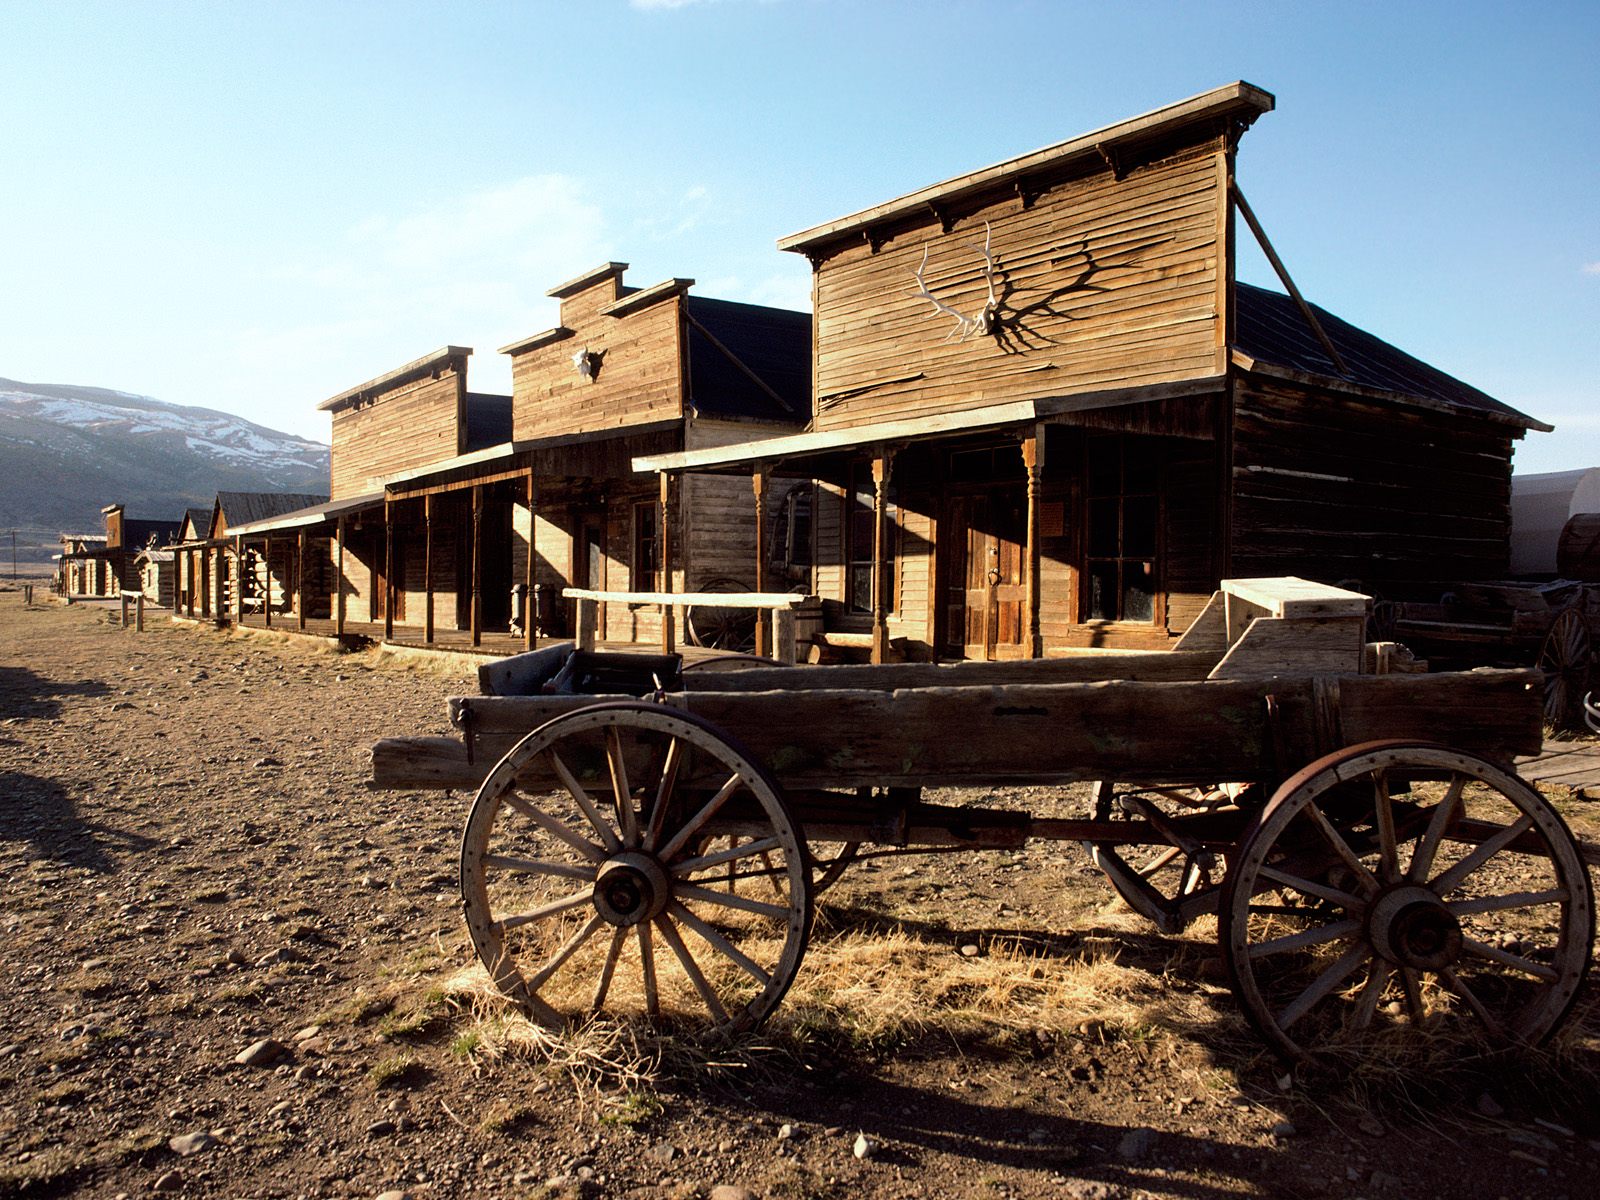 A Ghost Town Worth Visiting: Why and How Content Marketers Should Use Google+